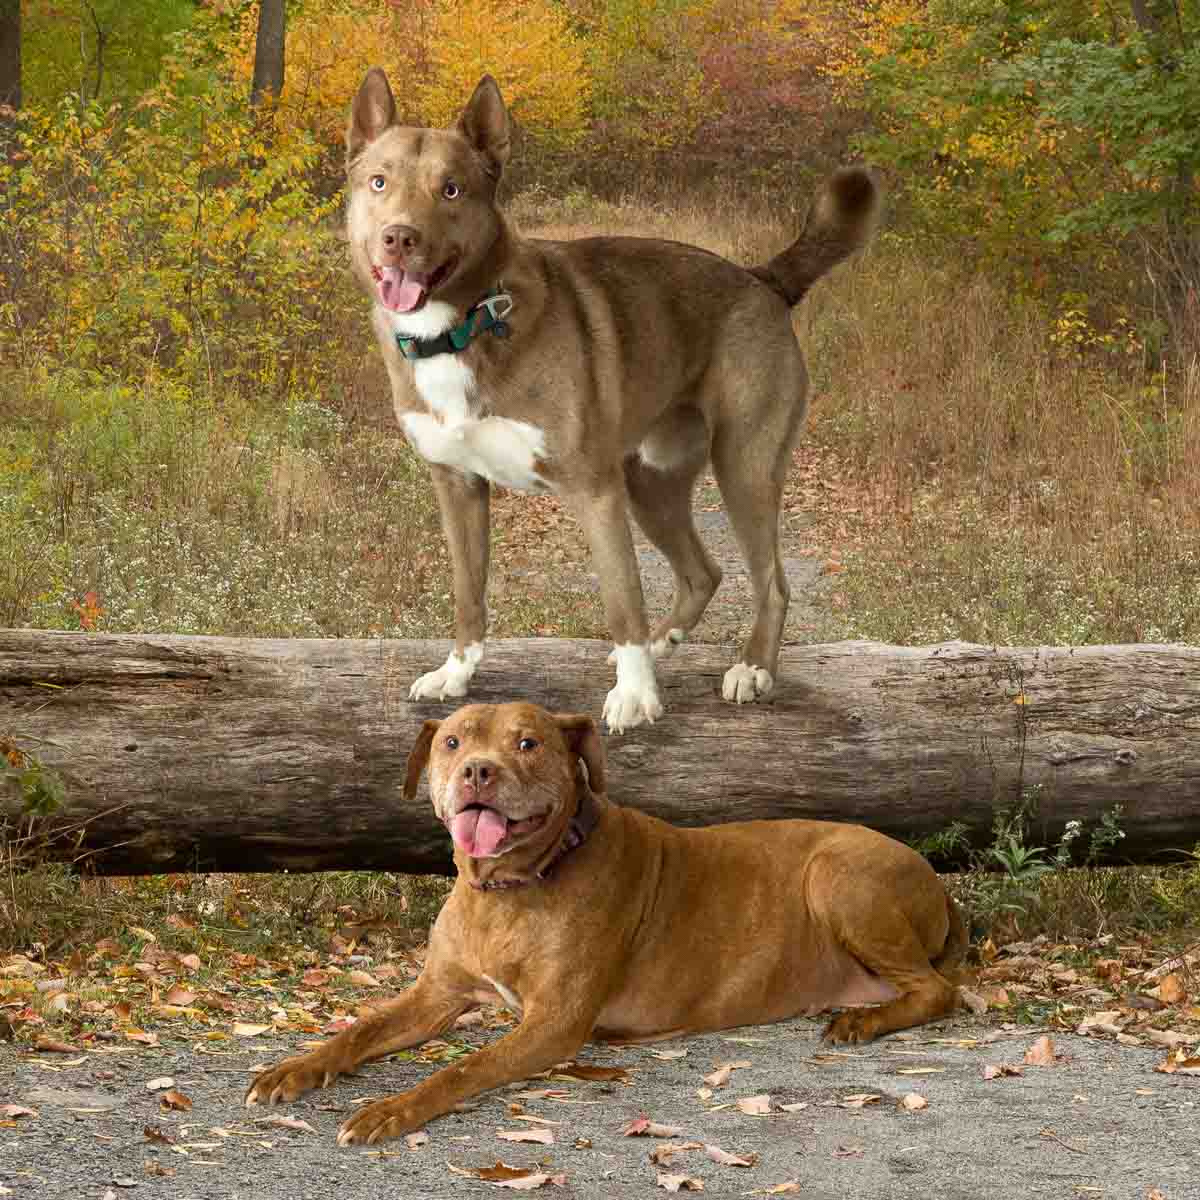 Two dogs are sitting on a log and one is standing up.